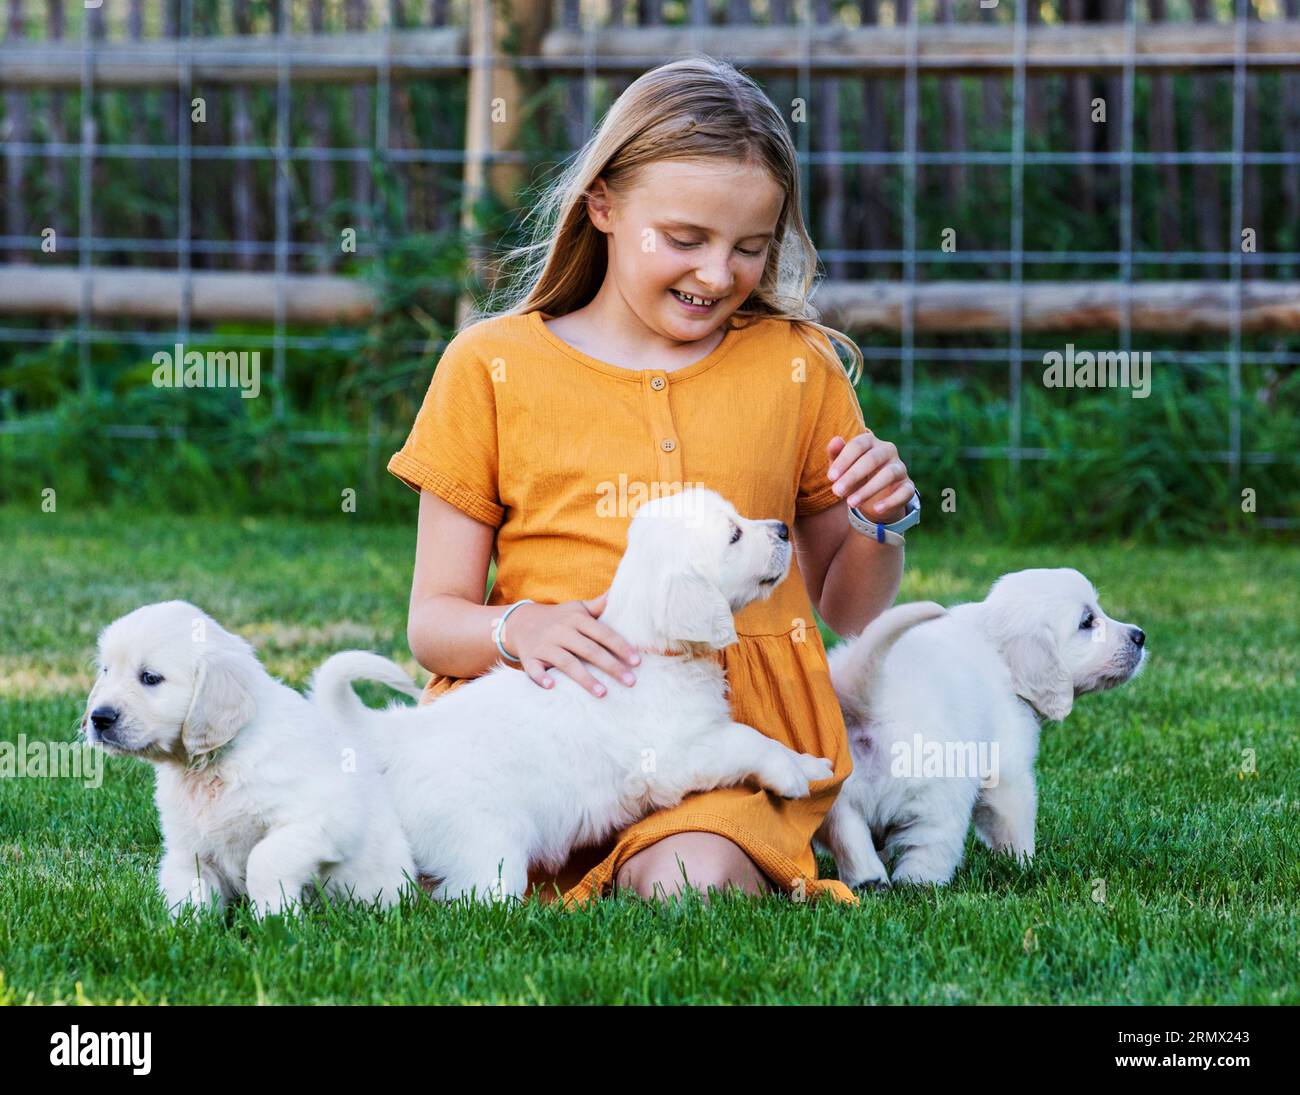 Young girl playing outside on lawn with Platinum, or Cream colored Golden Retriever puppies Stock Photo